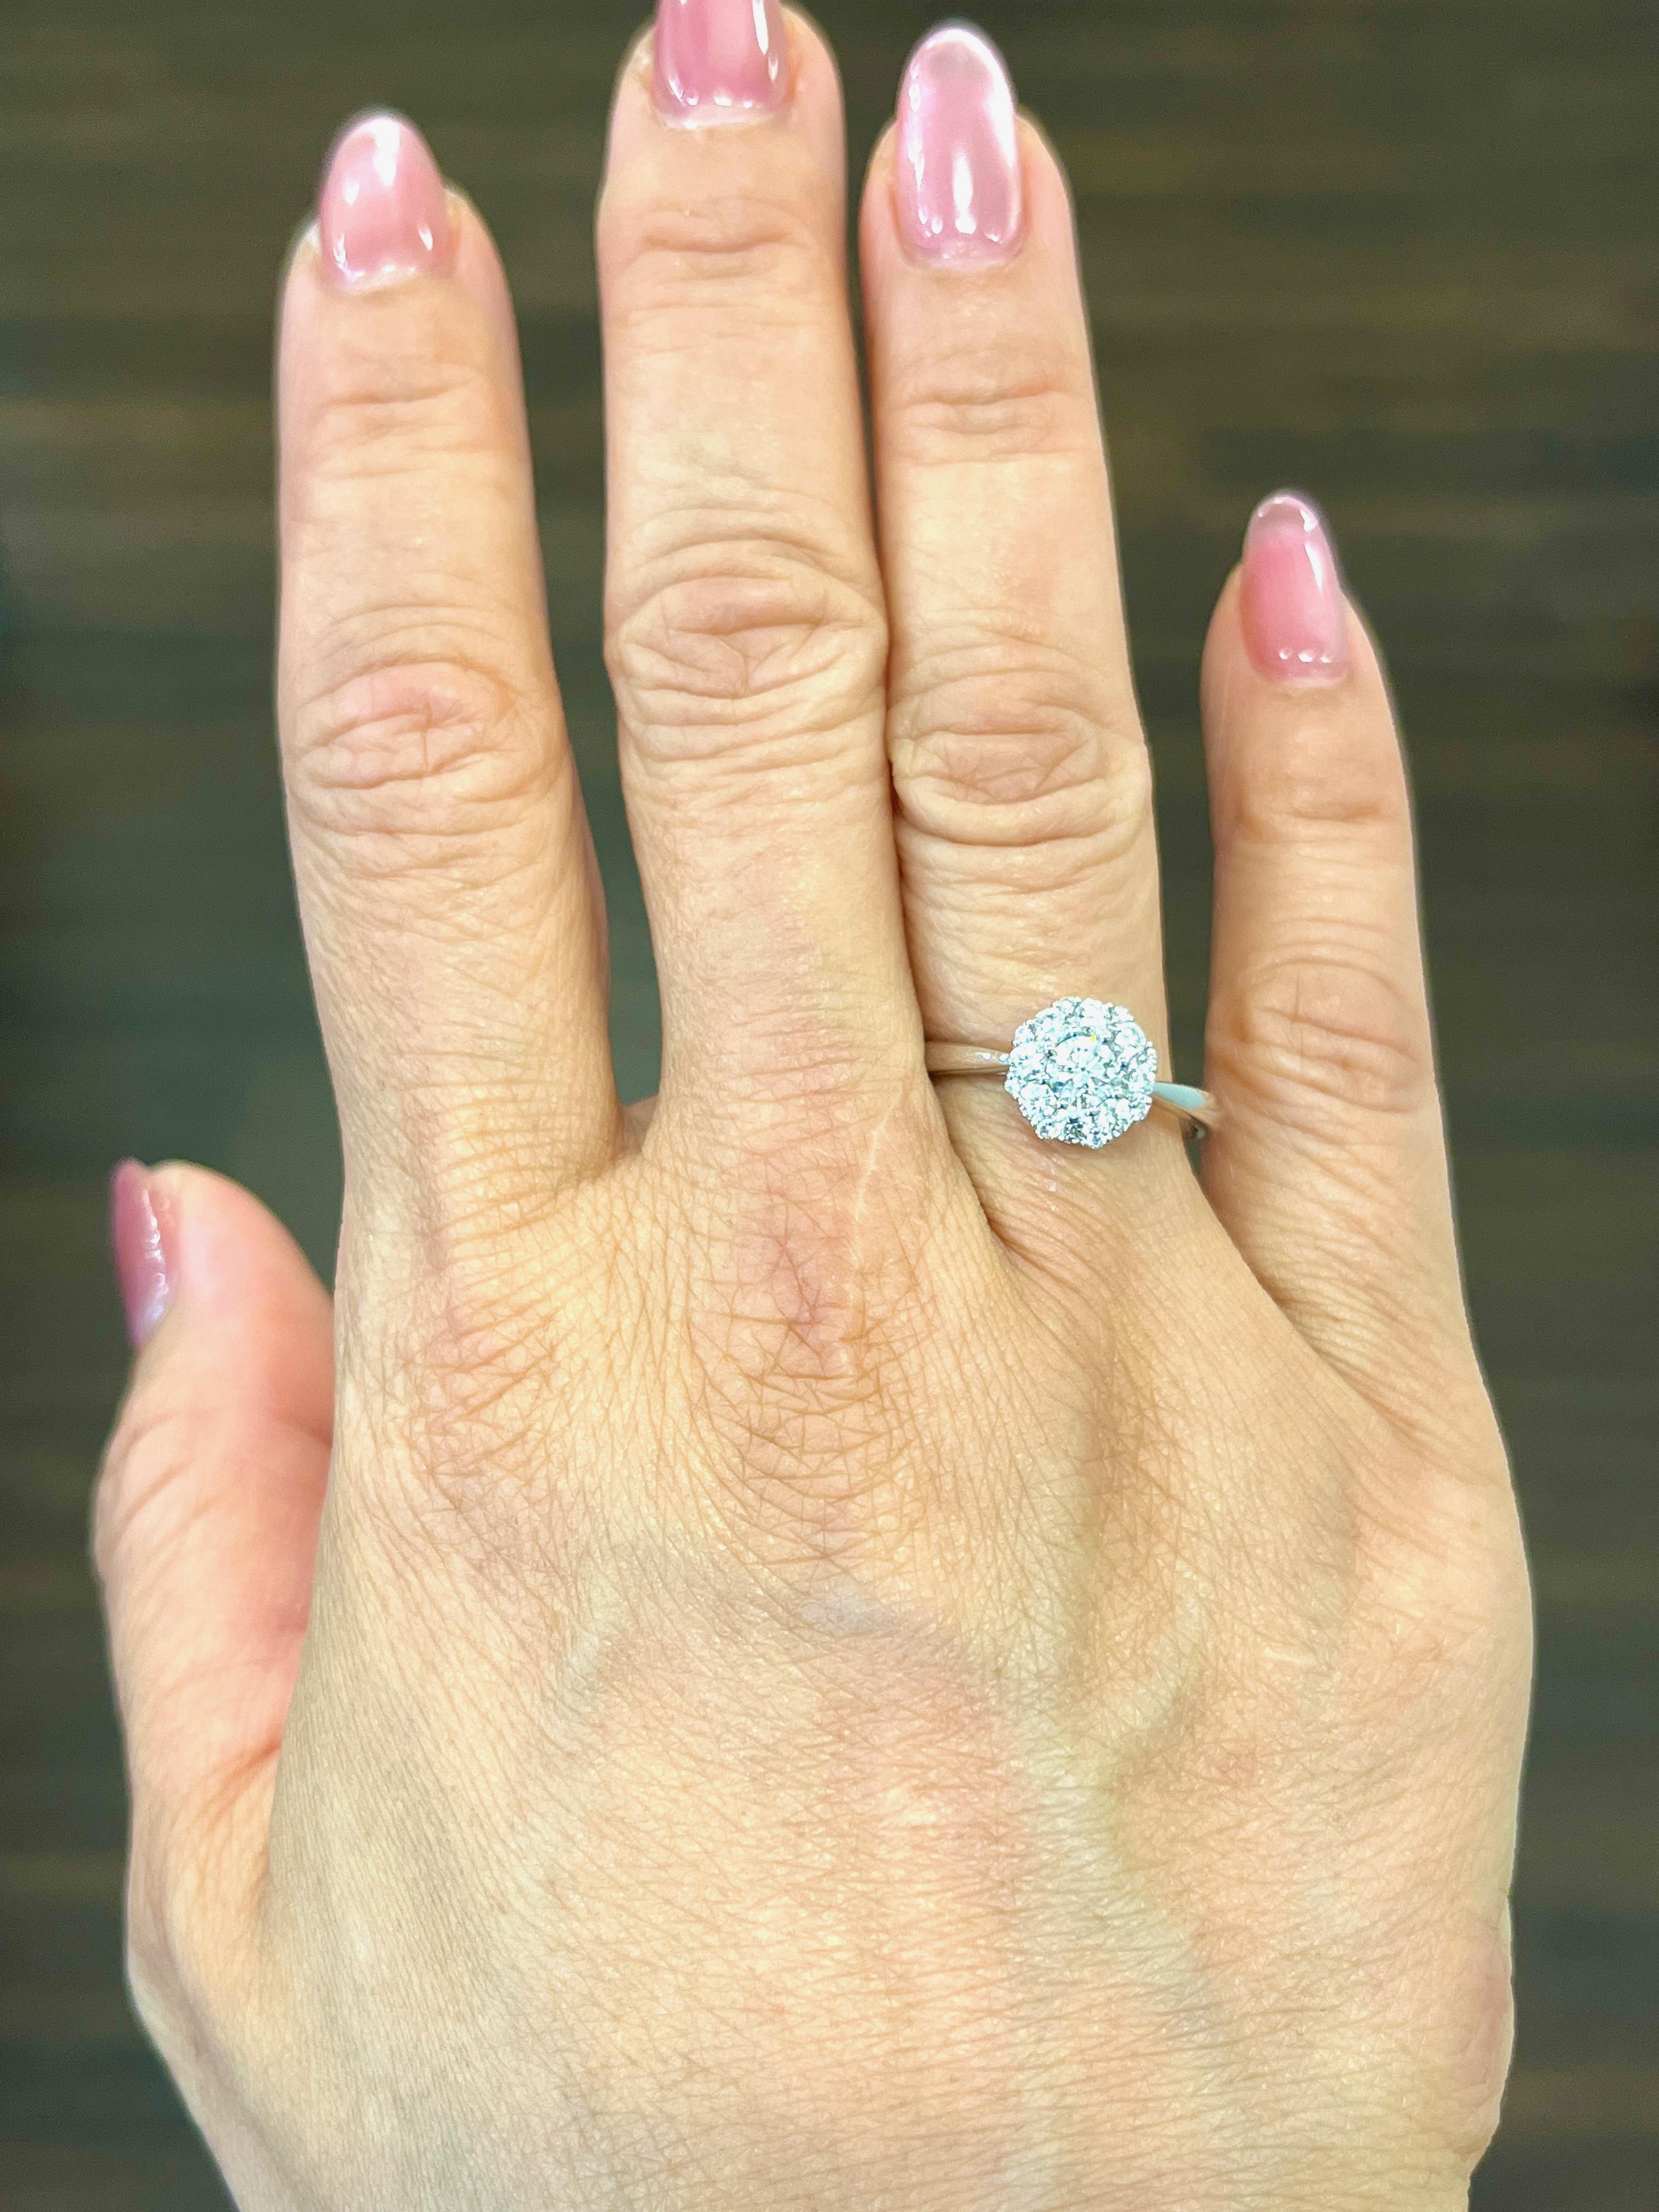 This gorgeous diamond features 17 diamonds weighing 0.72 ct set in 18k white gold. The diamonds are F/G in color and VS1/VS2 in clarity. A beautiful addition to any jeweler's collection. 